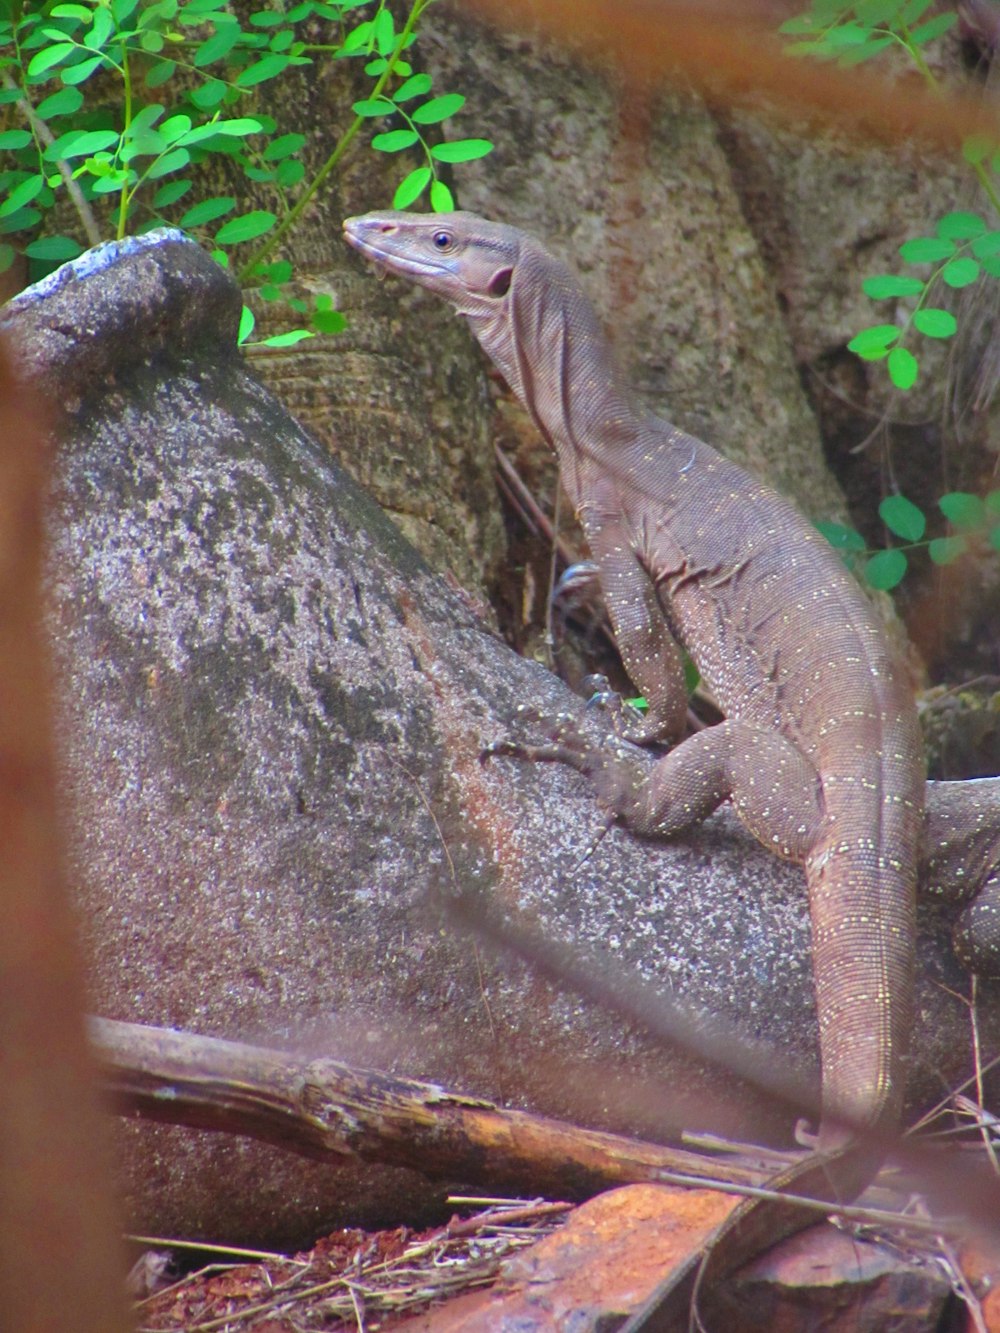 a couple of lizards on a rock